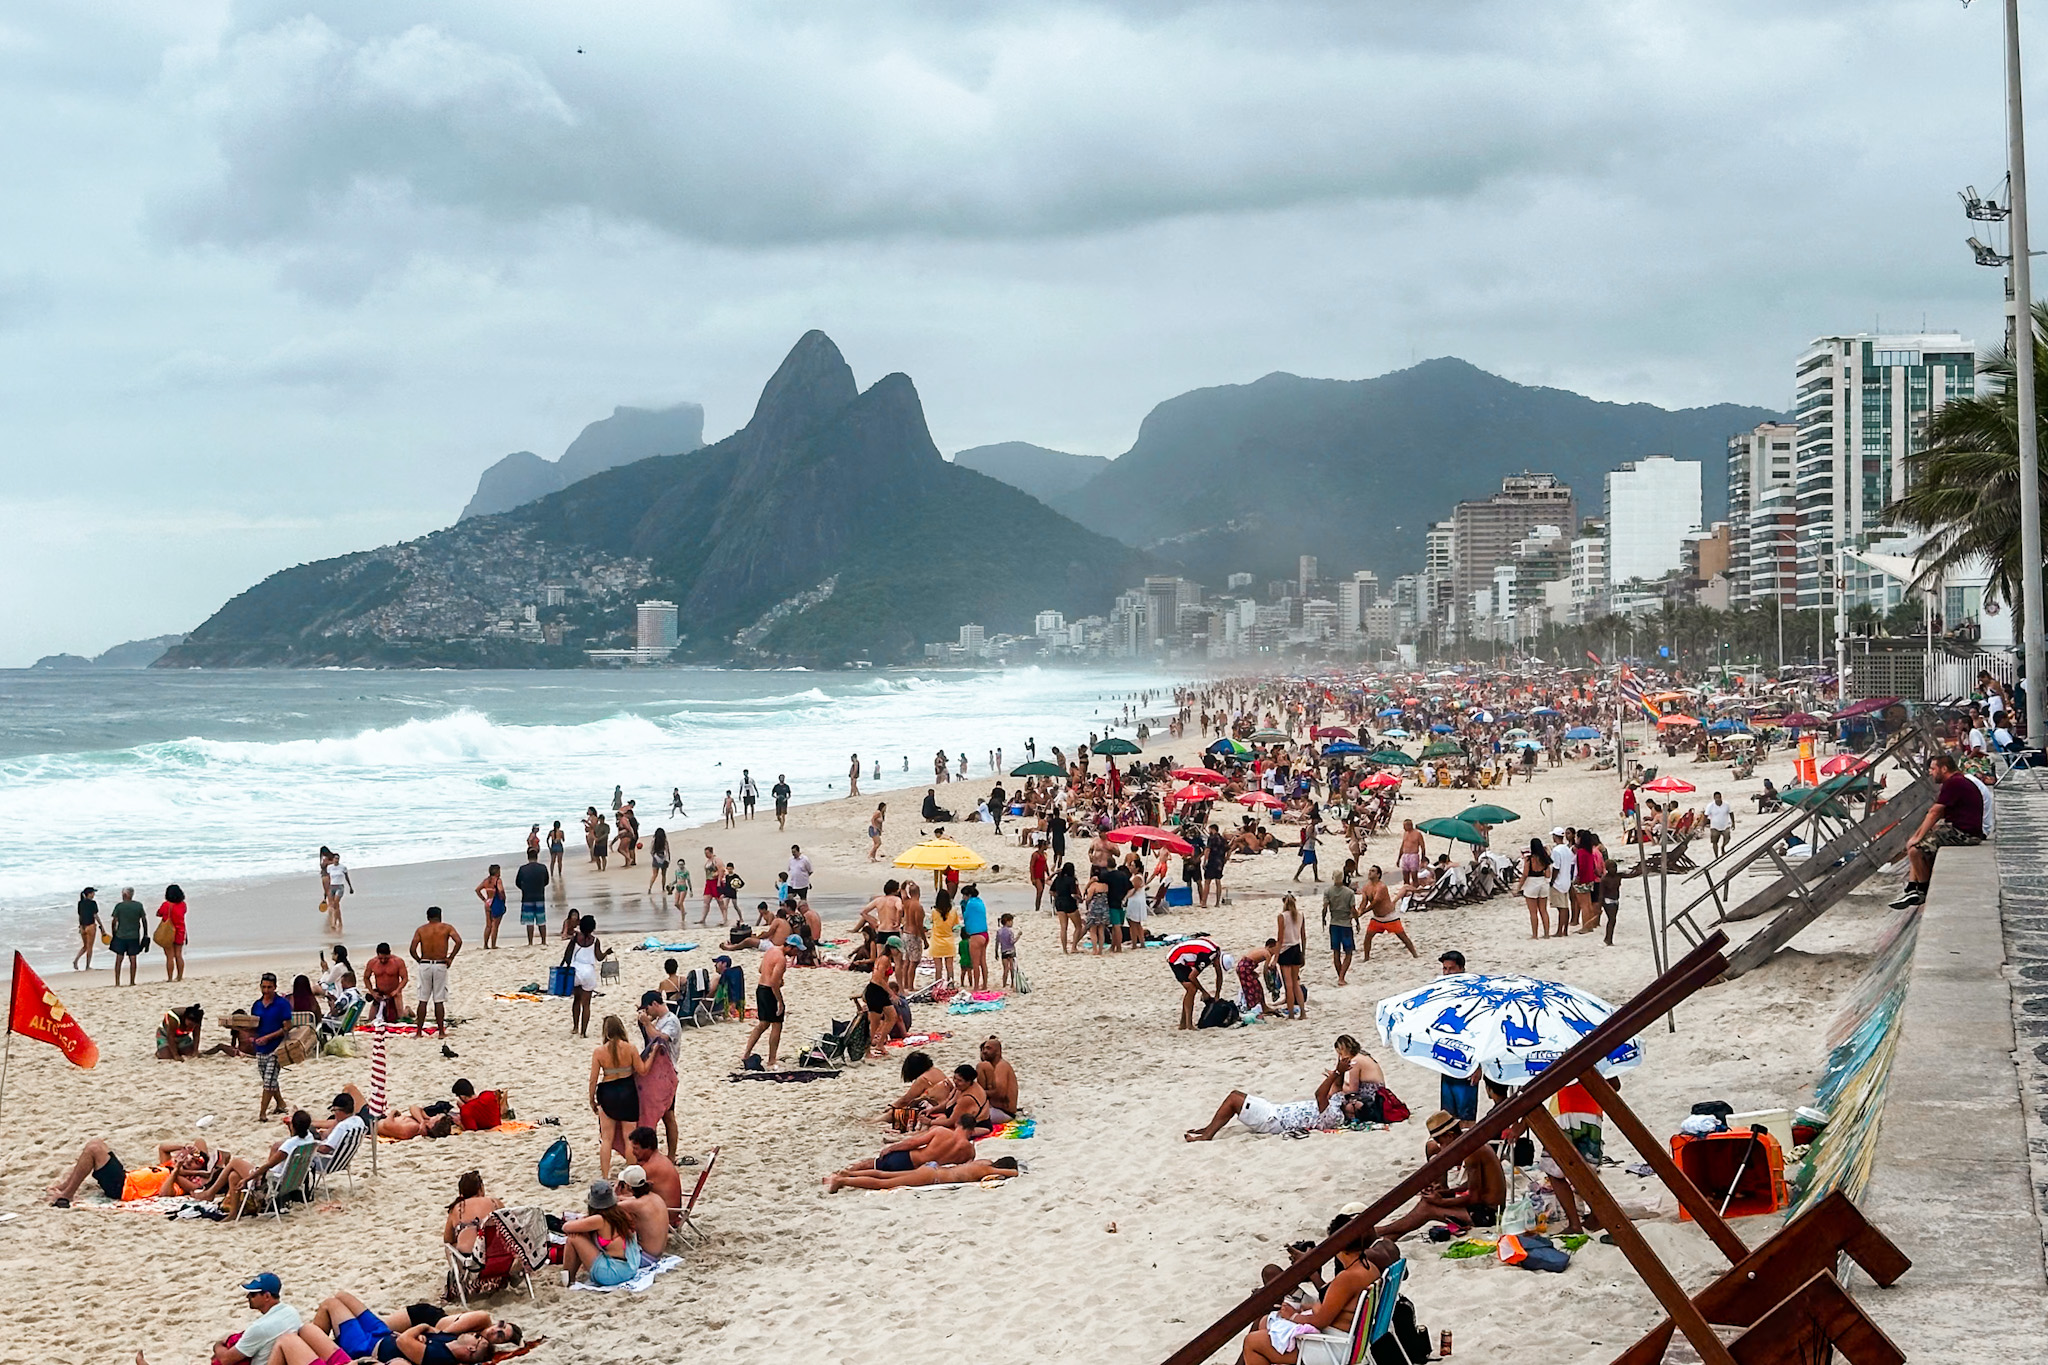 Things to do in Rio: Enjoy a day at Ipanema beach